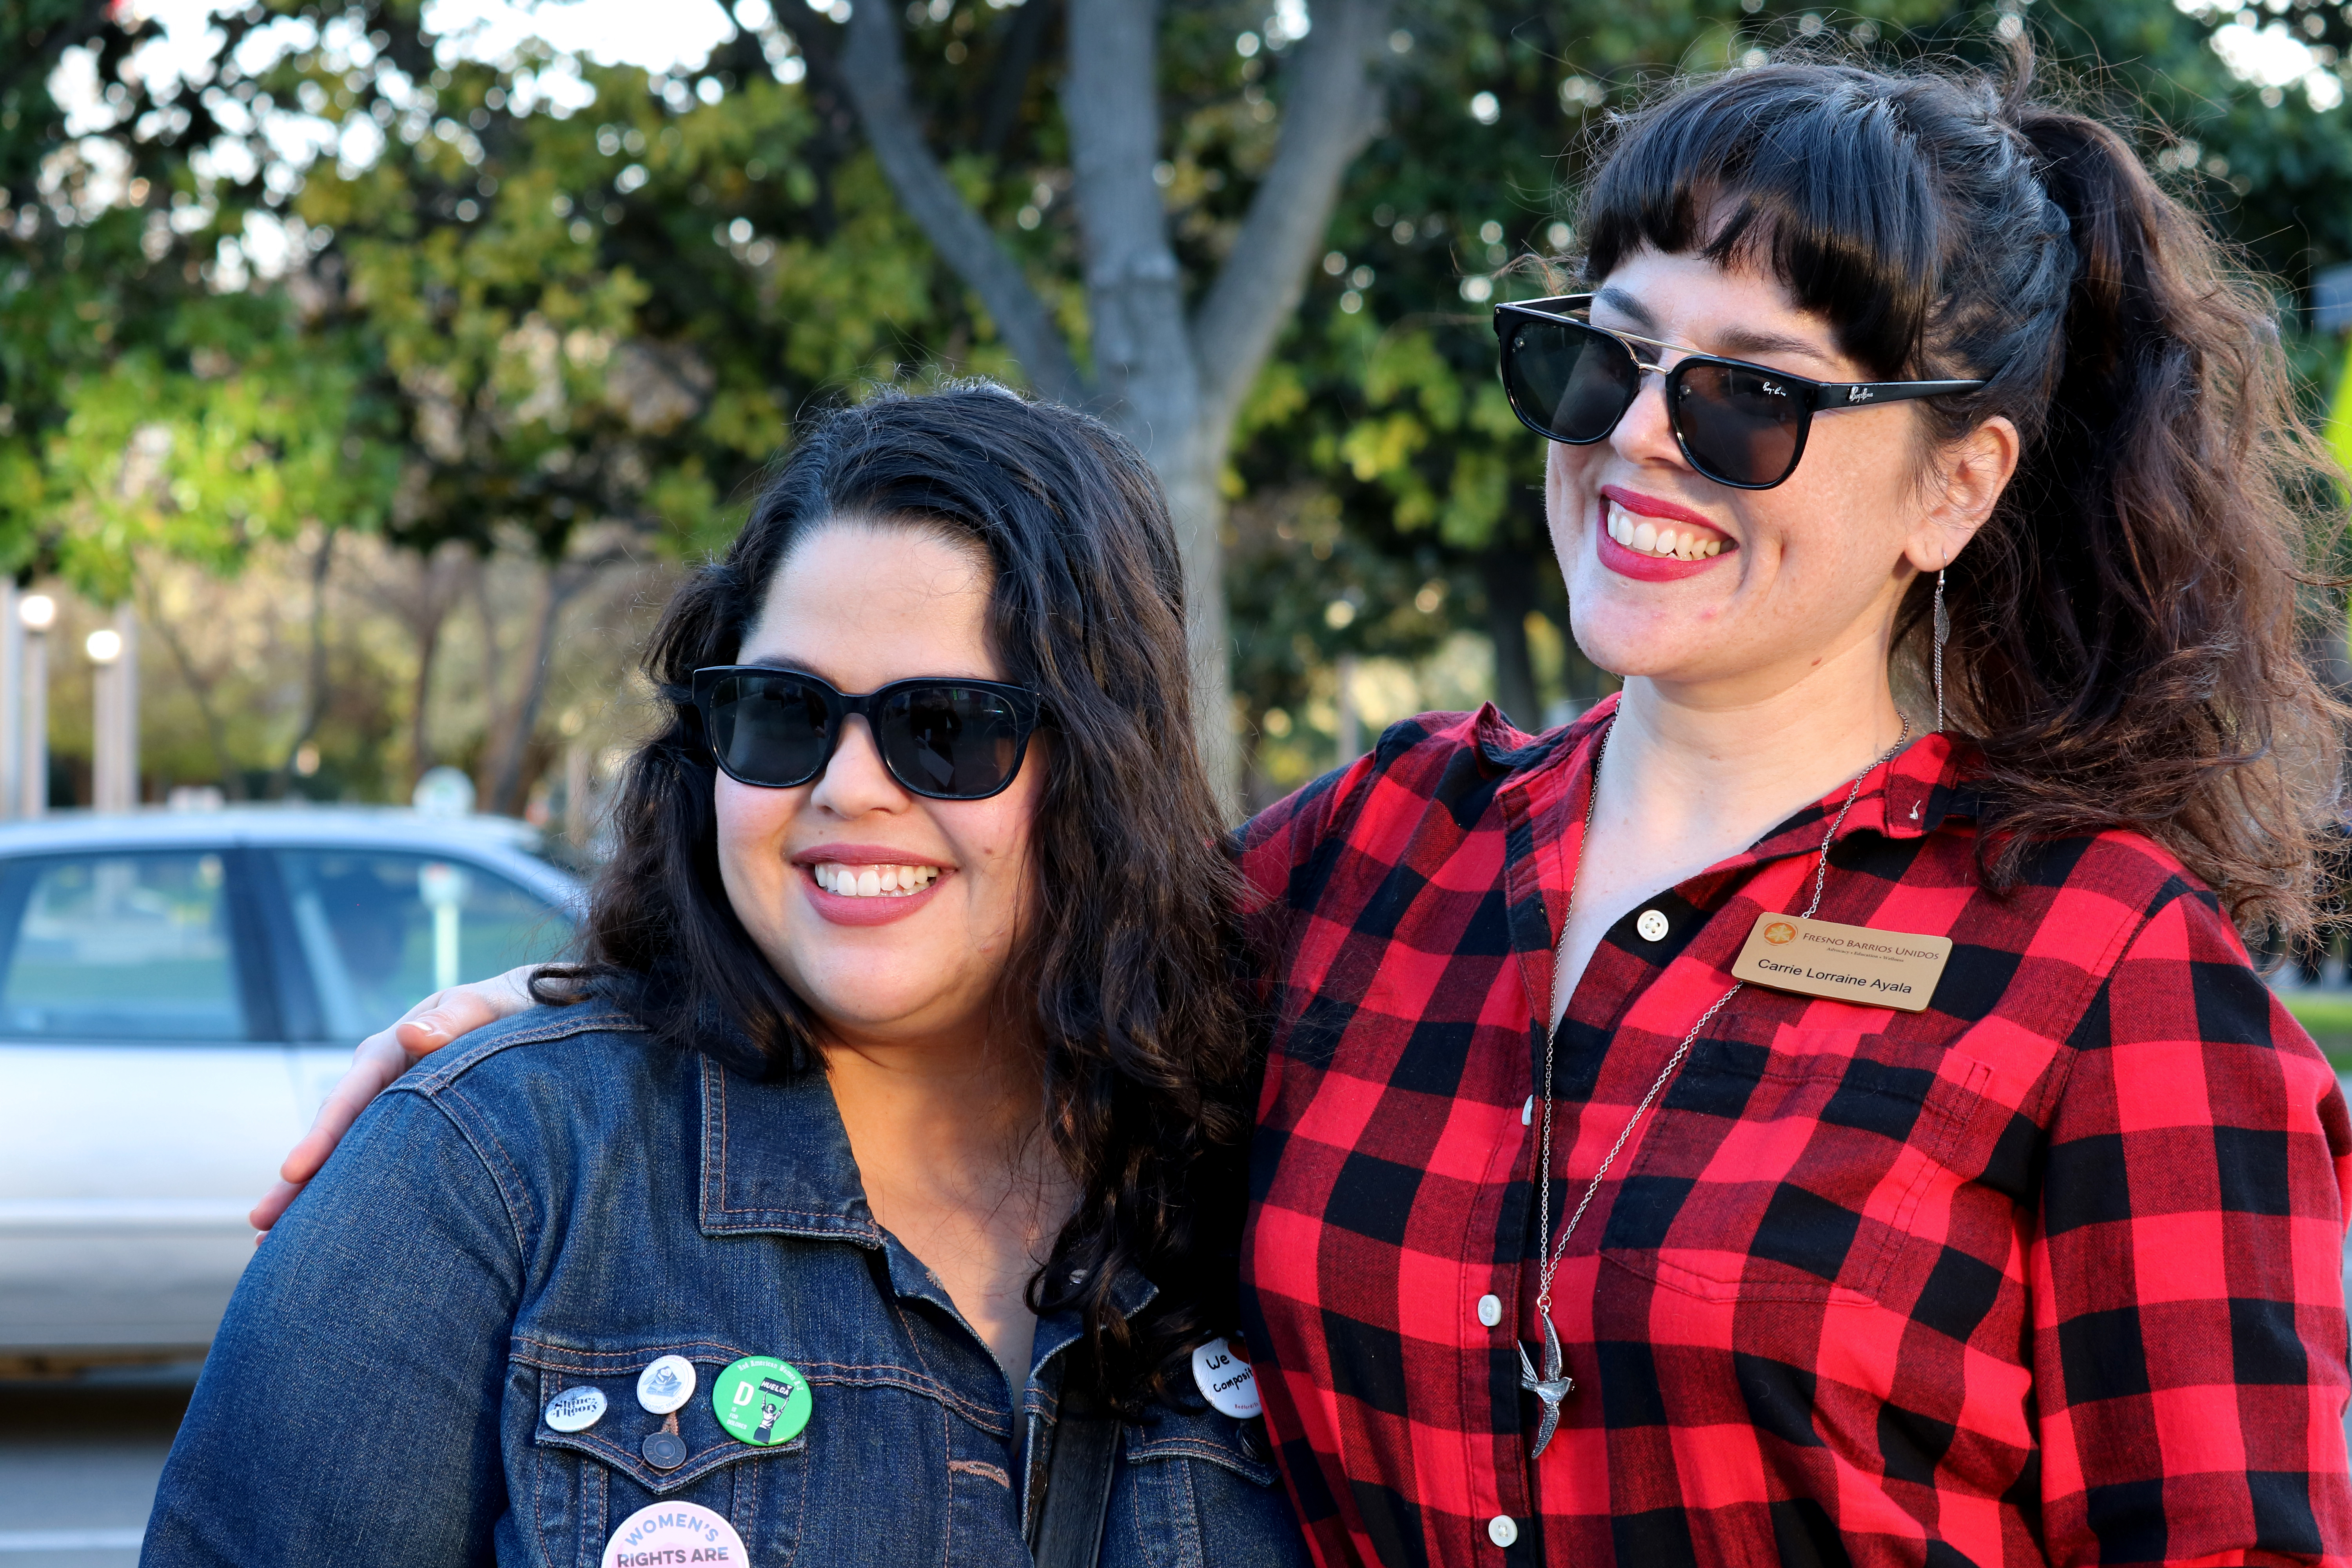 Carrie Ayala (right) said, “Immigrants are directly affected in today's society. Particularly under Trump, they have been scapegoated as the root of the economic and criminal problems in the United States. And that's just not true.” Brenda Venezia (left) said that it’s “...often easy to lose sight of specific oppression in big marches. The oppression of immigrants needs to be directly protested in itself.”